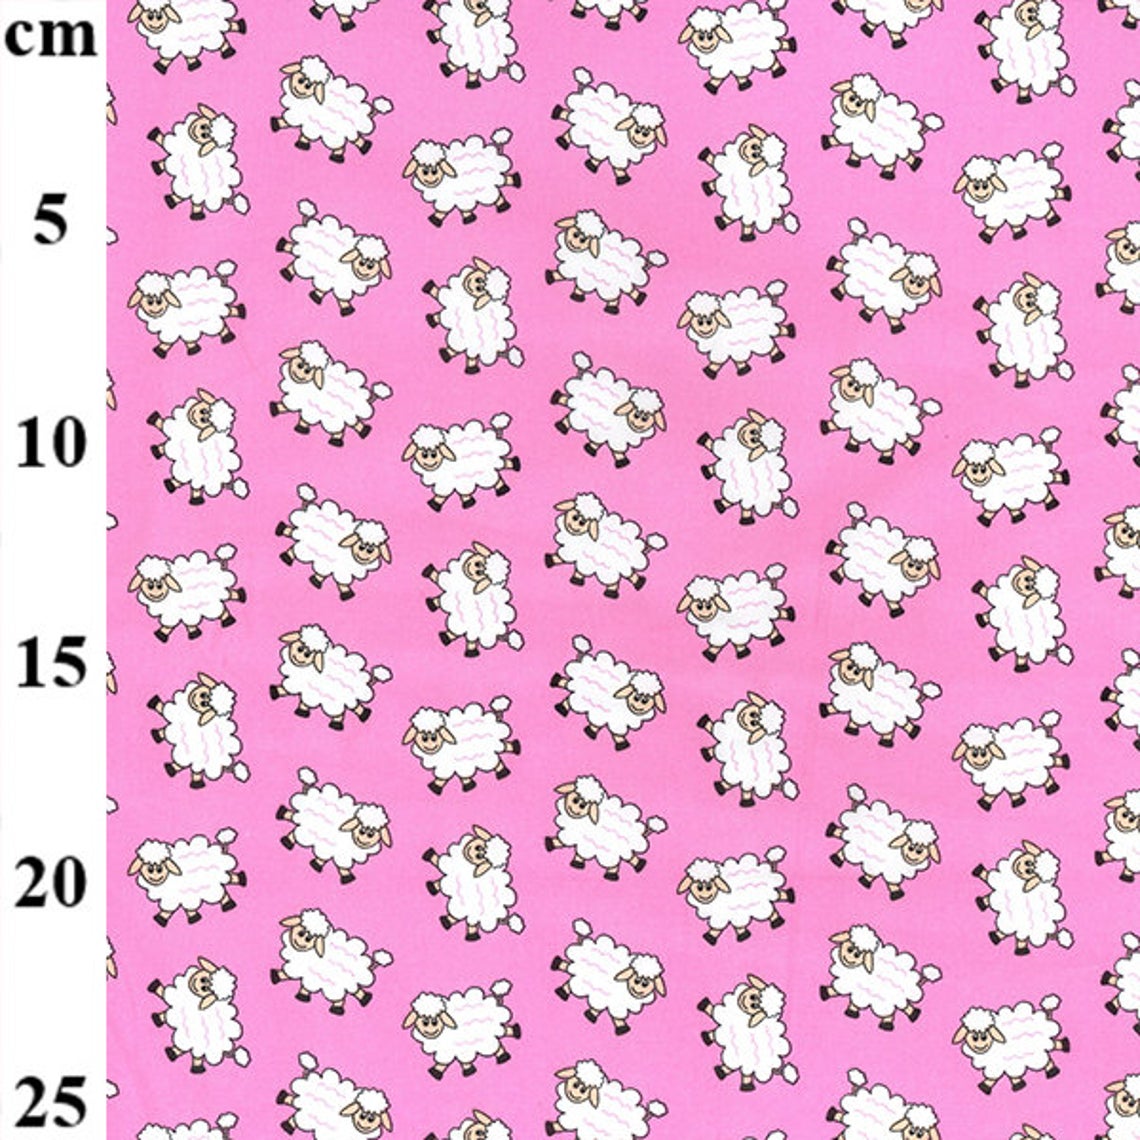 /images/product-images/2020images/FashionFabric/COTTONPOPLIN/Pop2021Aug/sheep-pink.jpg